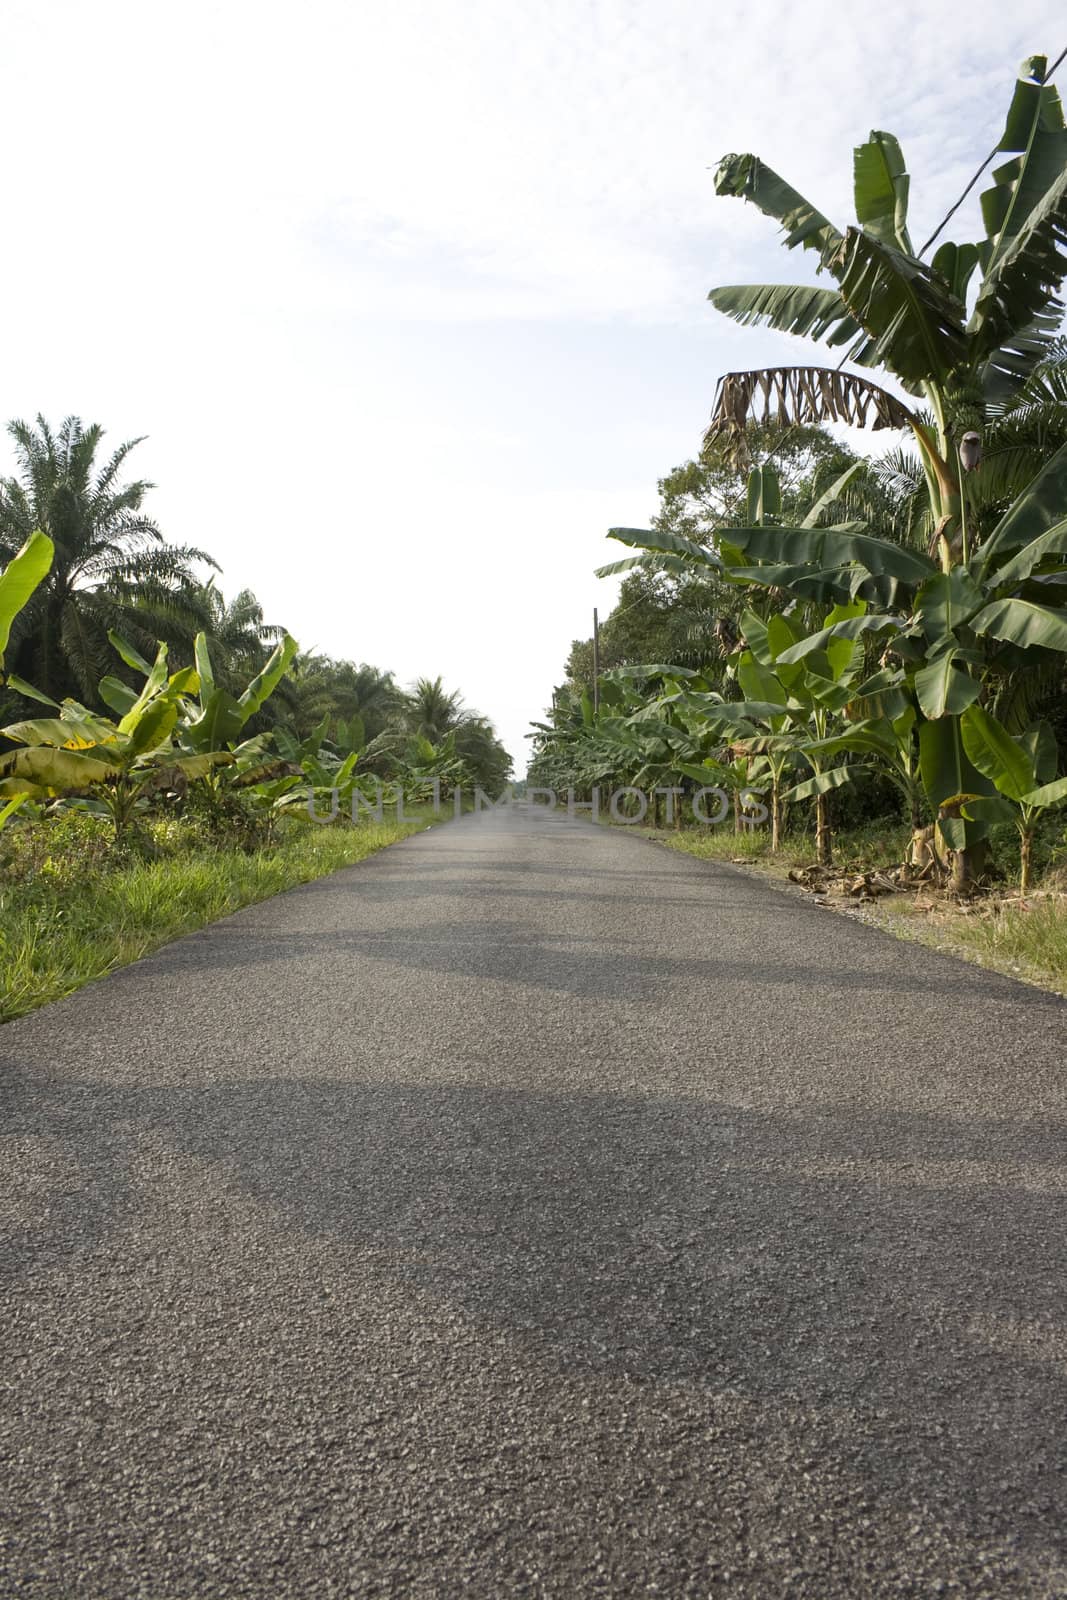 Road at a countryside in a tropical country.